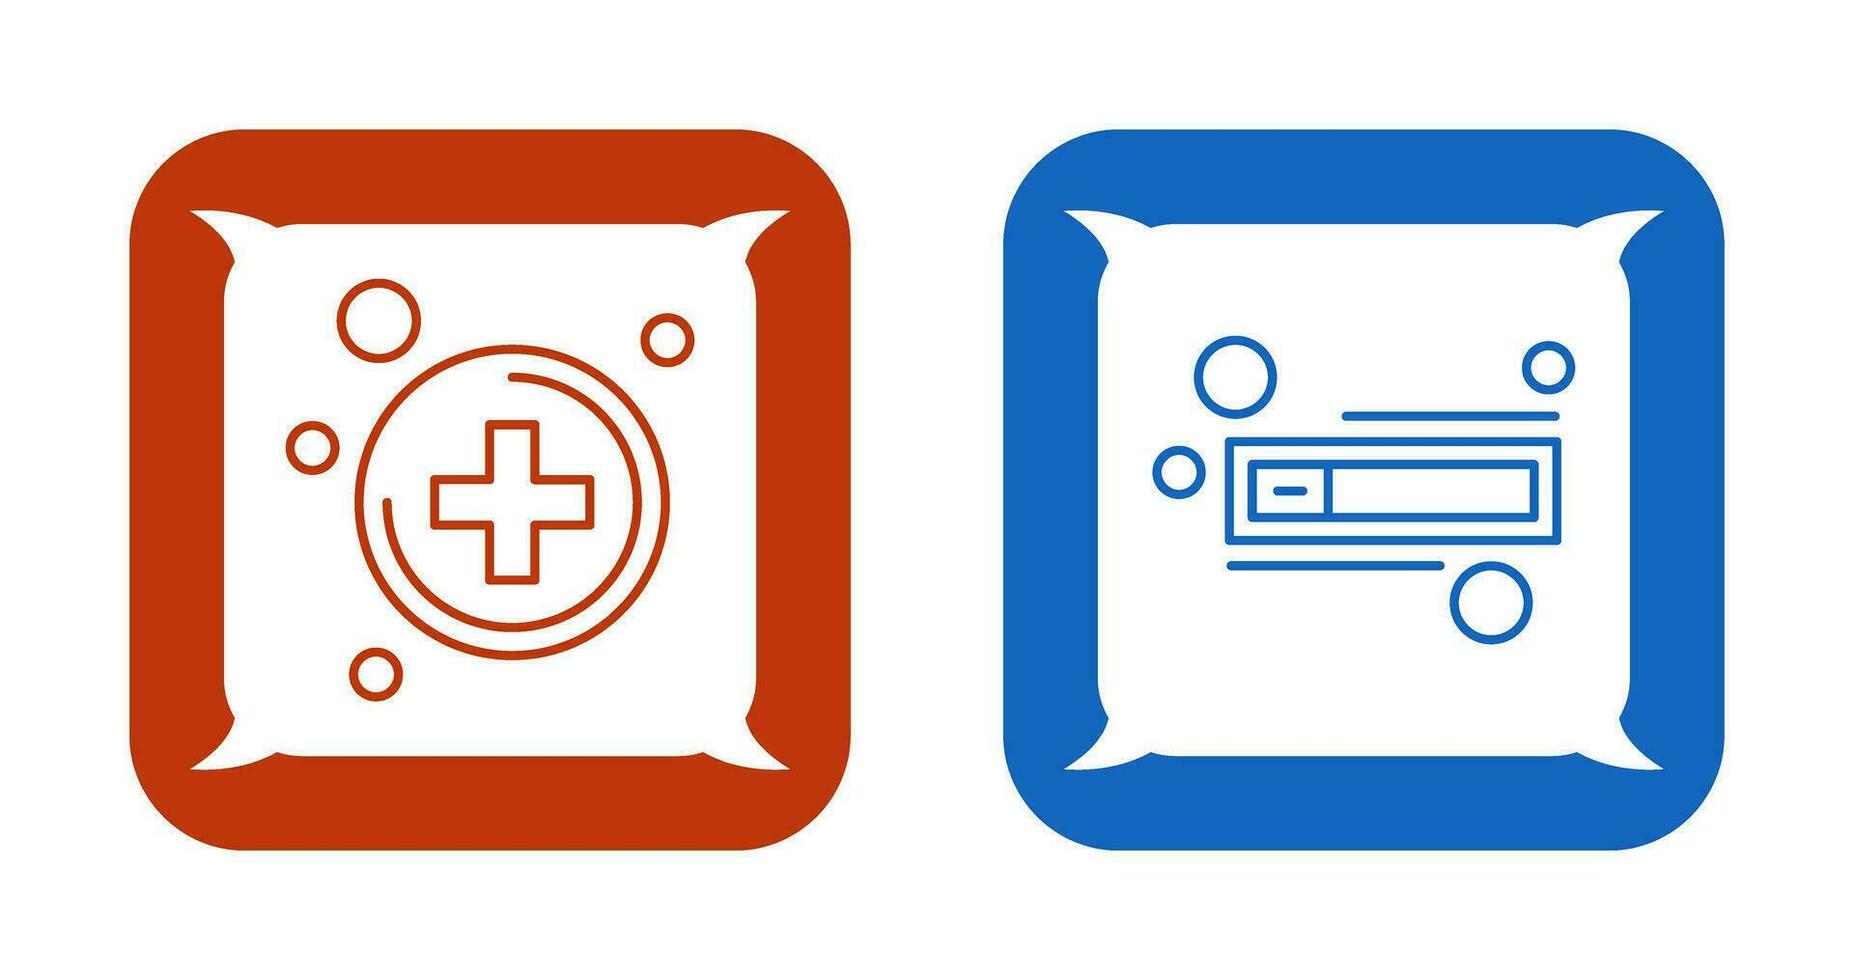 Add and Switch Icon vector